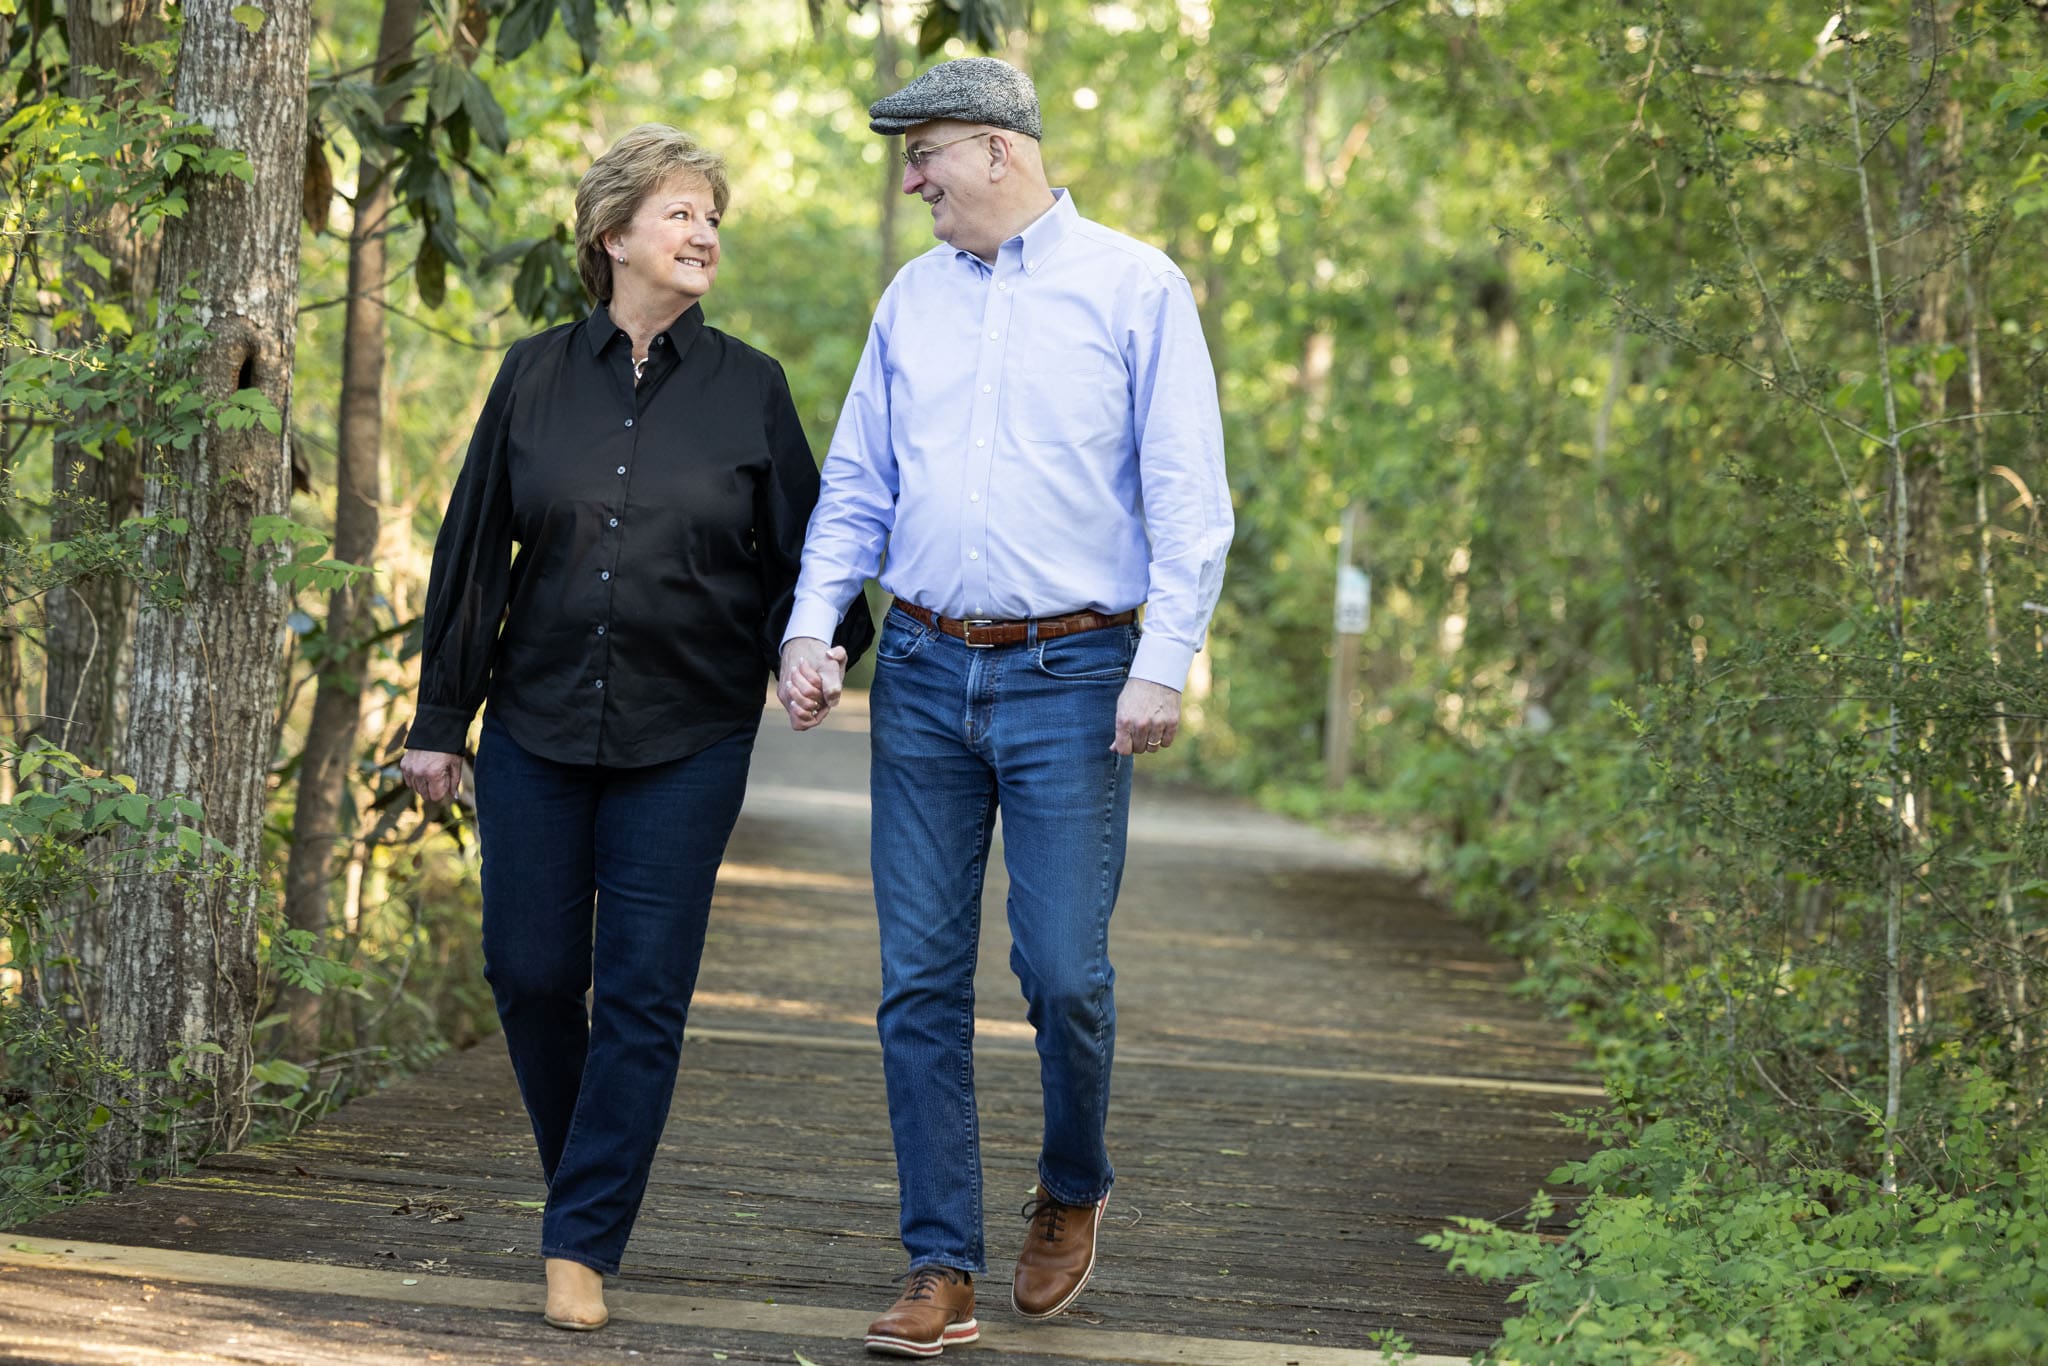 sharon-hewitt-mid-sixties-caucasian-woman-with-mid-60-year-old-man-holding-hands-and-taking-stroll-in-park